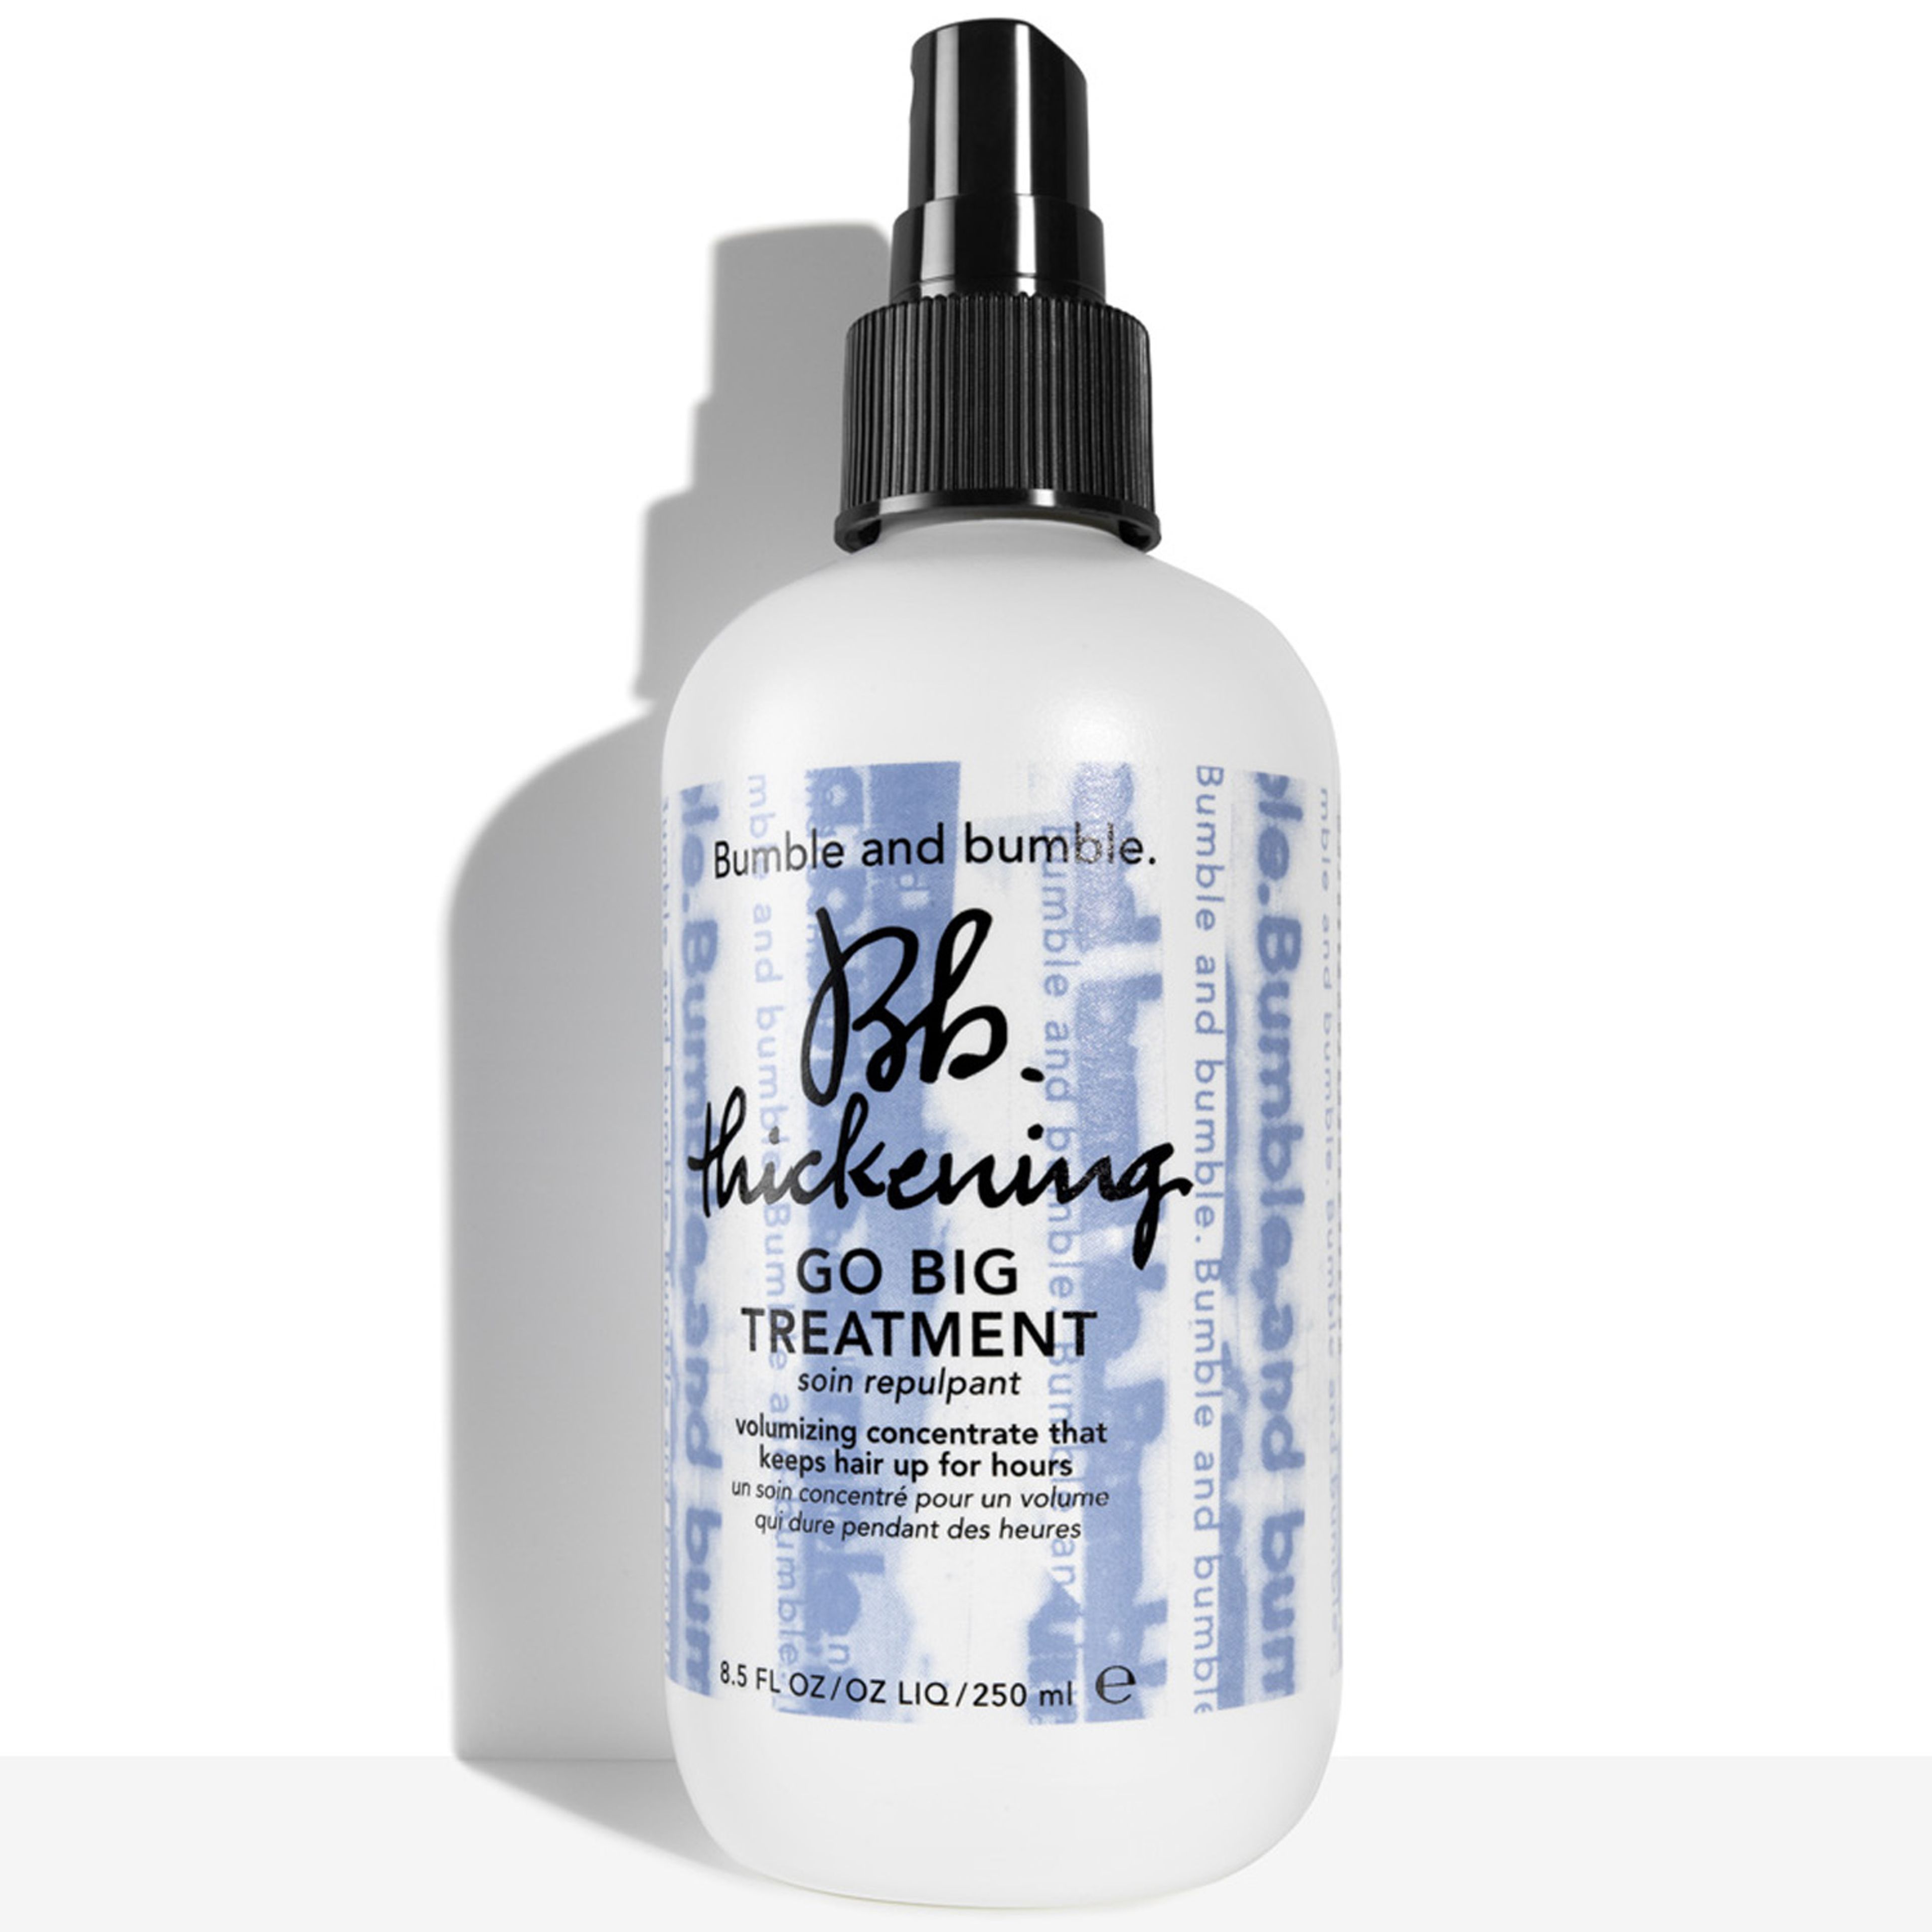 Bumble and bumble Thickening Go Big Treatment 1